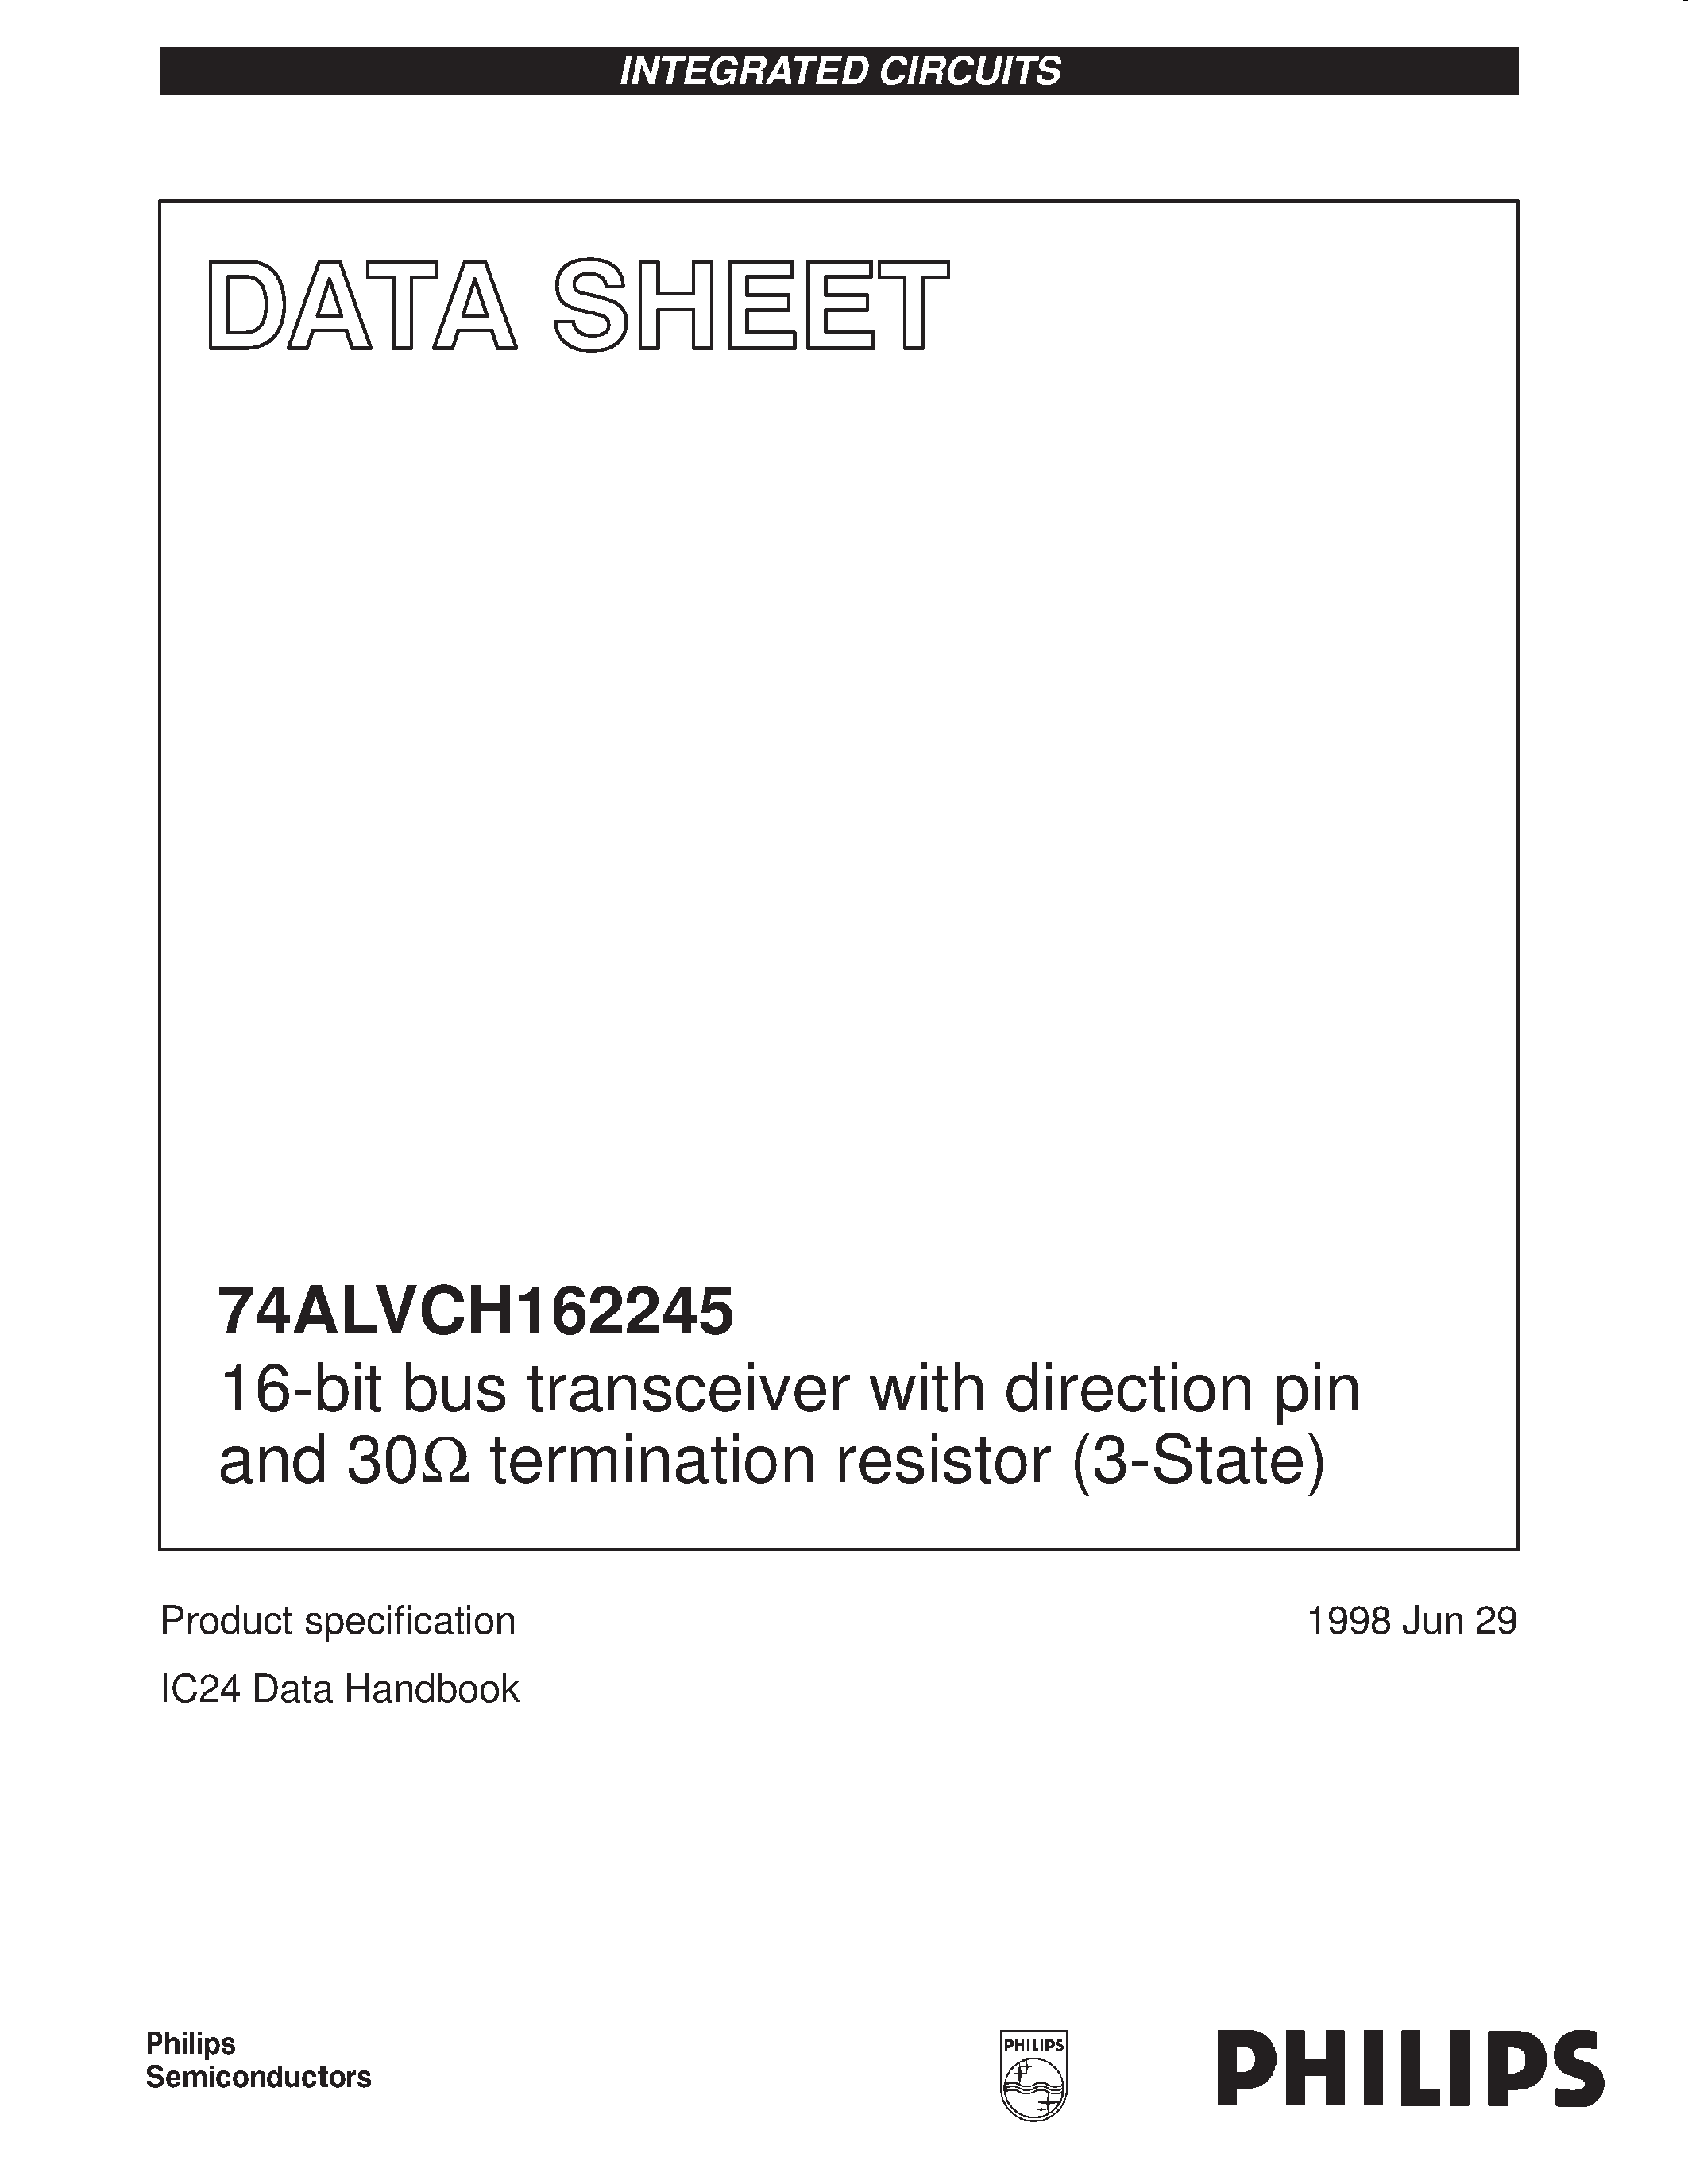 Даташит 74ALVCH162245 - 16-bit bus transceiver with direction pin and 30ohm termination resistor 3-State страница 1